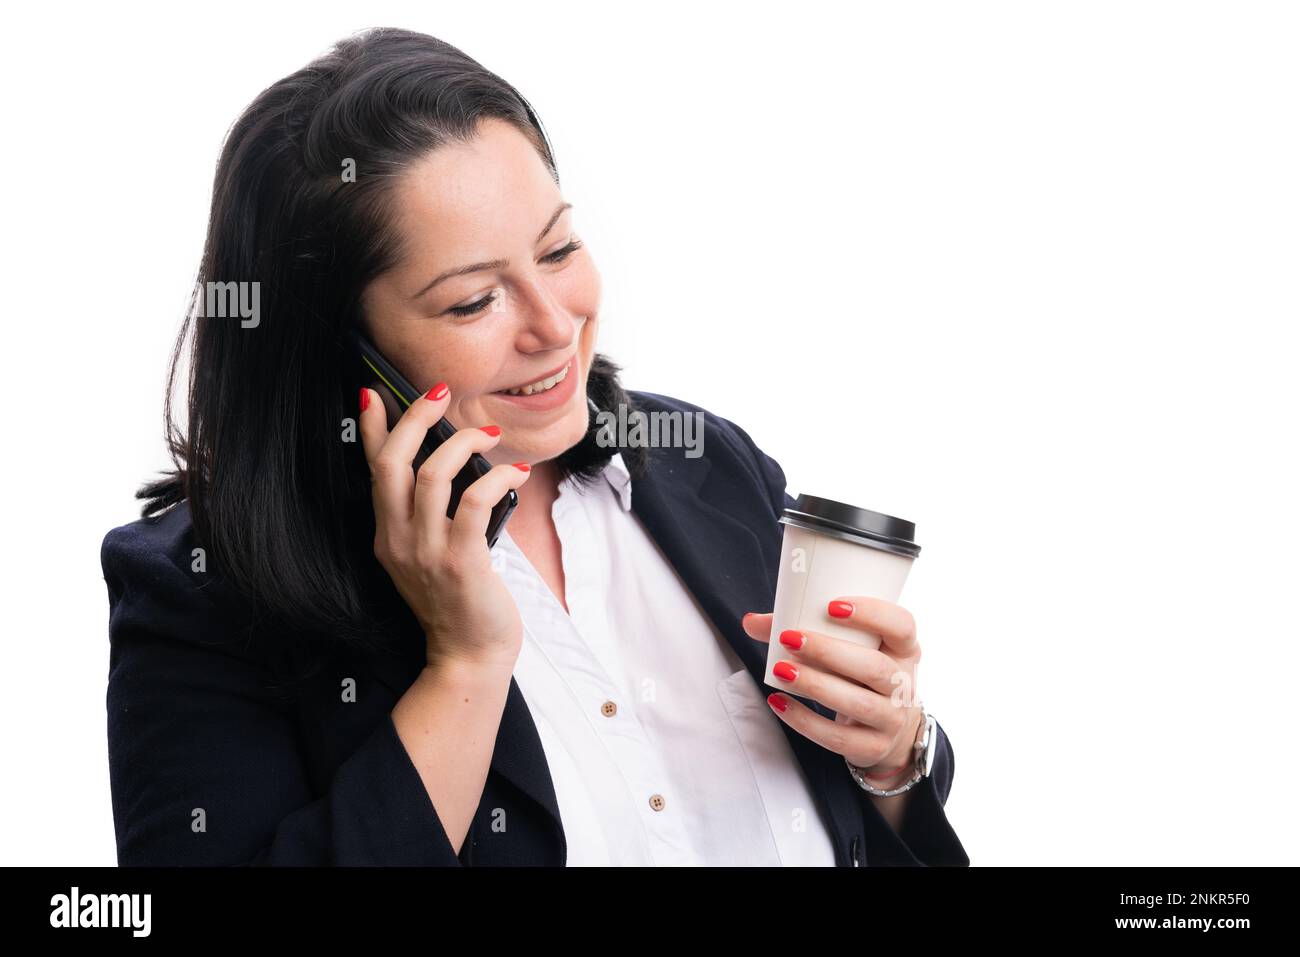 Adult businesswoman in office clothing smiling making phonecall holding take away cup of coffee isolated on white background Stock Photo